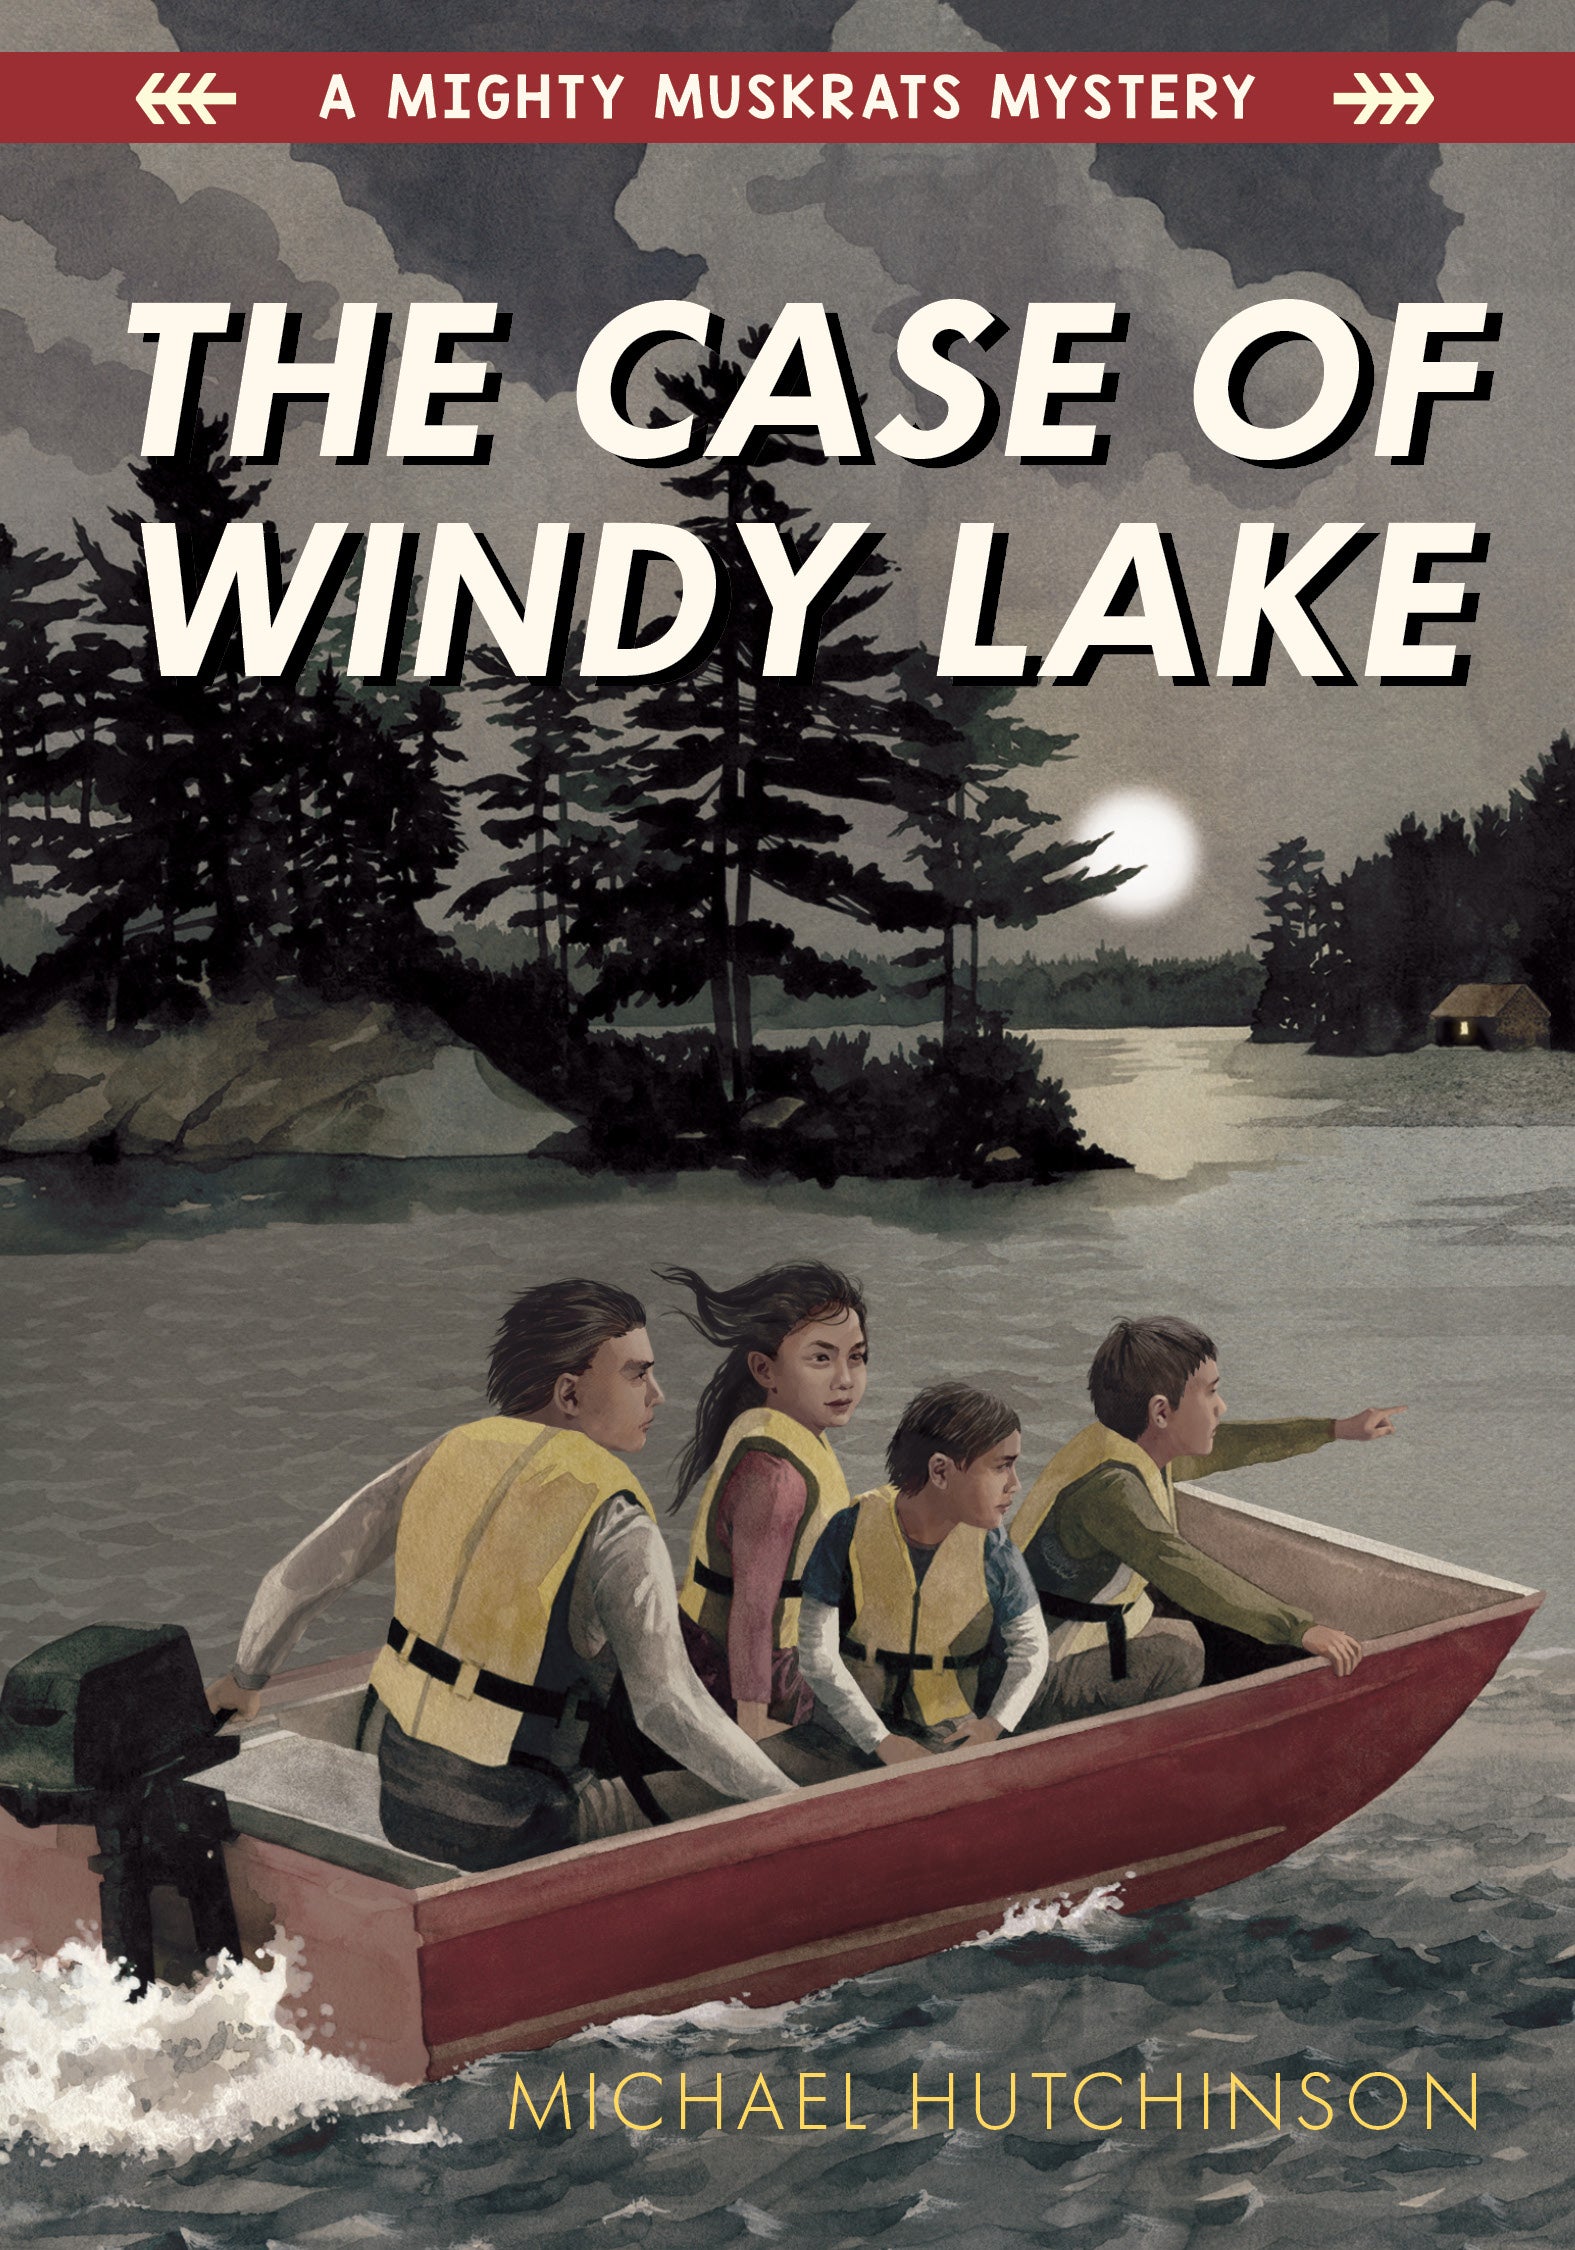 The Case of Windy Lake-ebook